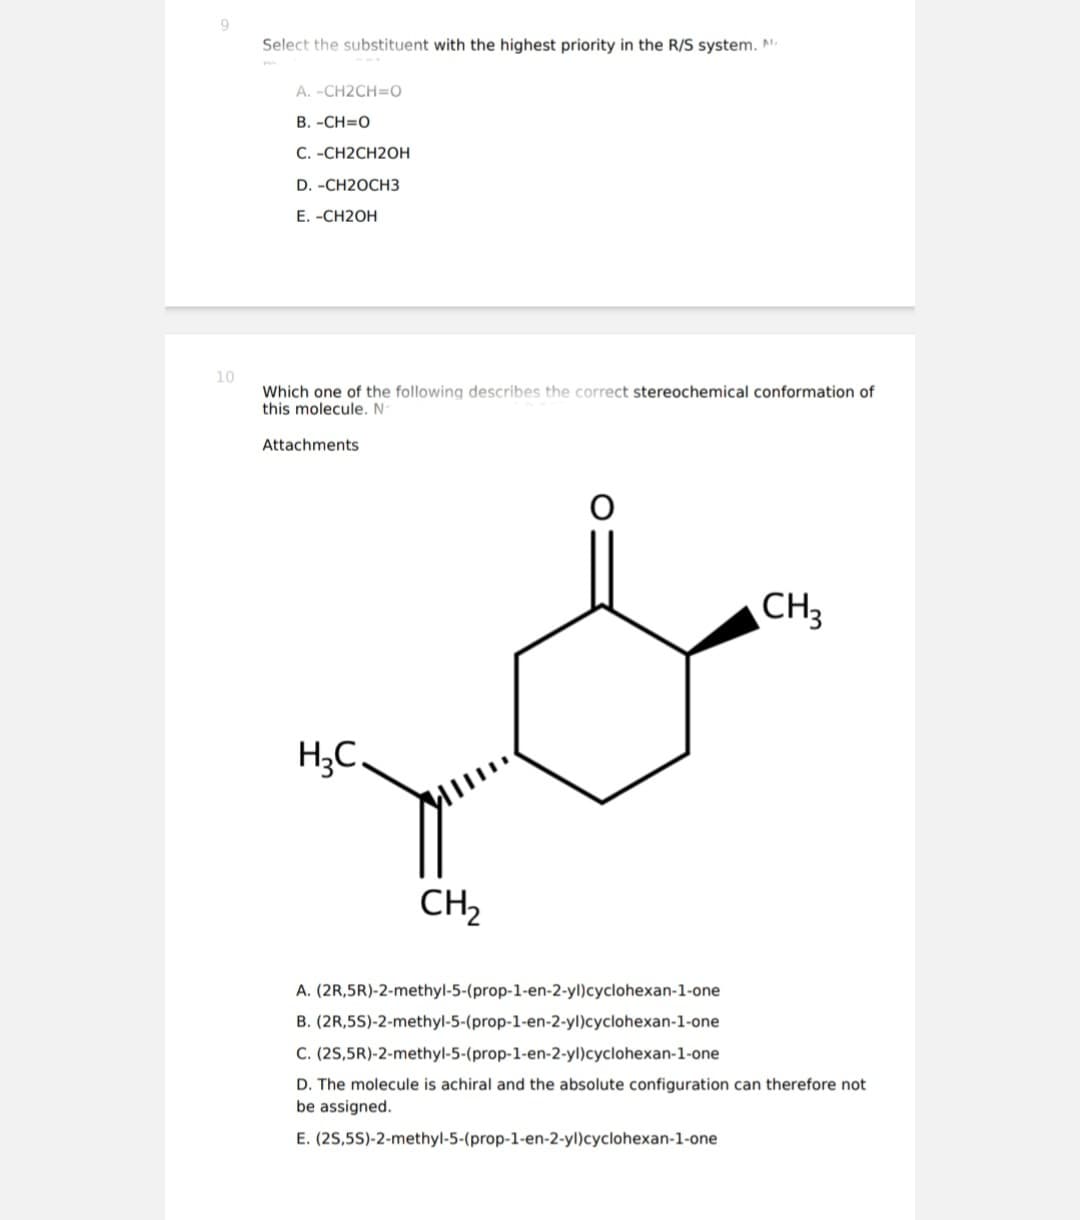 10
Select the substituent with the highest priority in the R/S system. N
A. -CH2CH=O
B. -CH=0
C. -CH2CH2OH
D. -CH2OCH3
E. -CH2OH
Which one of the following describes the correct stereochemical conformation of
this molecule. N
Attachments
H₂C.
CH₂
CH3
A.
(2R,5R)-2-methyl-5-(prop-1-en-2-yl)cyclohexan-1-one
B. (2R,5S)-2-methyl-5-(prop-1-en-2-yl)cyclohexan-1-one
(2S,5R)-2-methyl-5-(prop-1-en-2-yl)cyclohexan-1-one
C.
D. The molecule is achiral and the absolute configuration can therefore not
be assigned.
E. (25,5S)-2-methyl-5-(prop-1-en-2-yl)cyclohexan-1-one